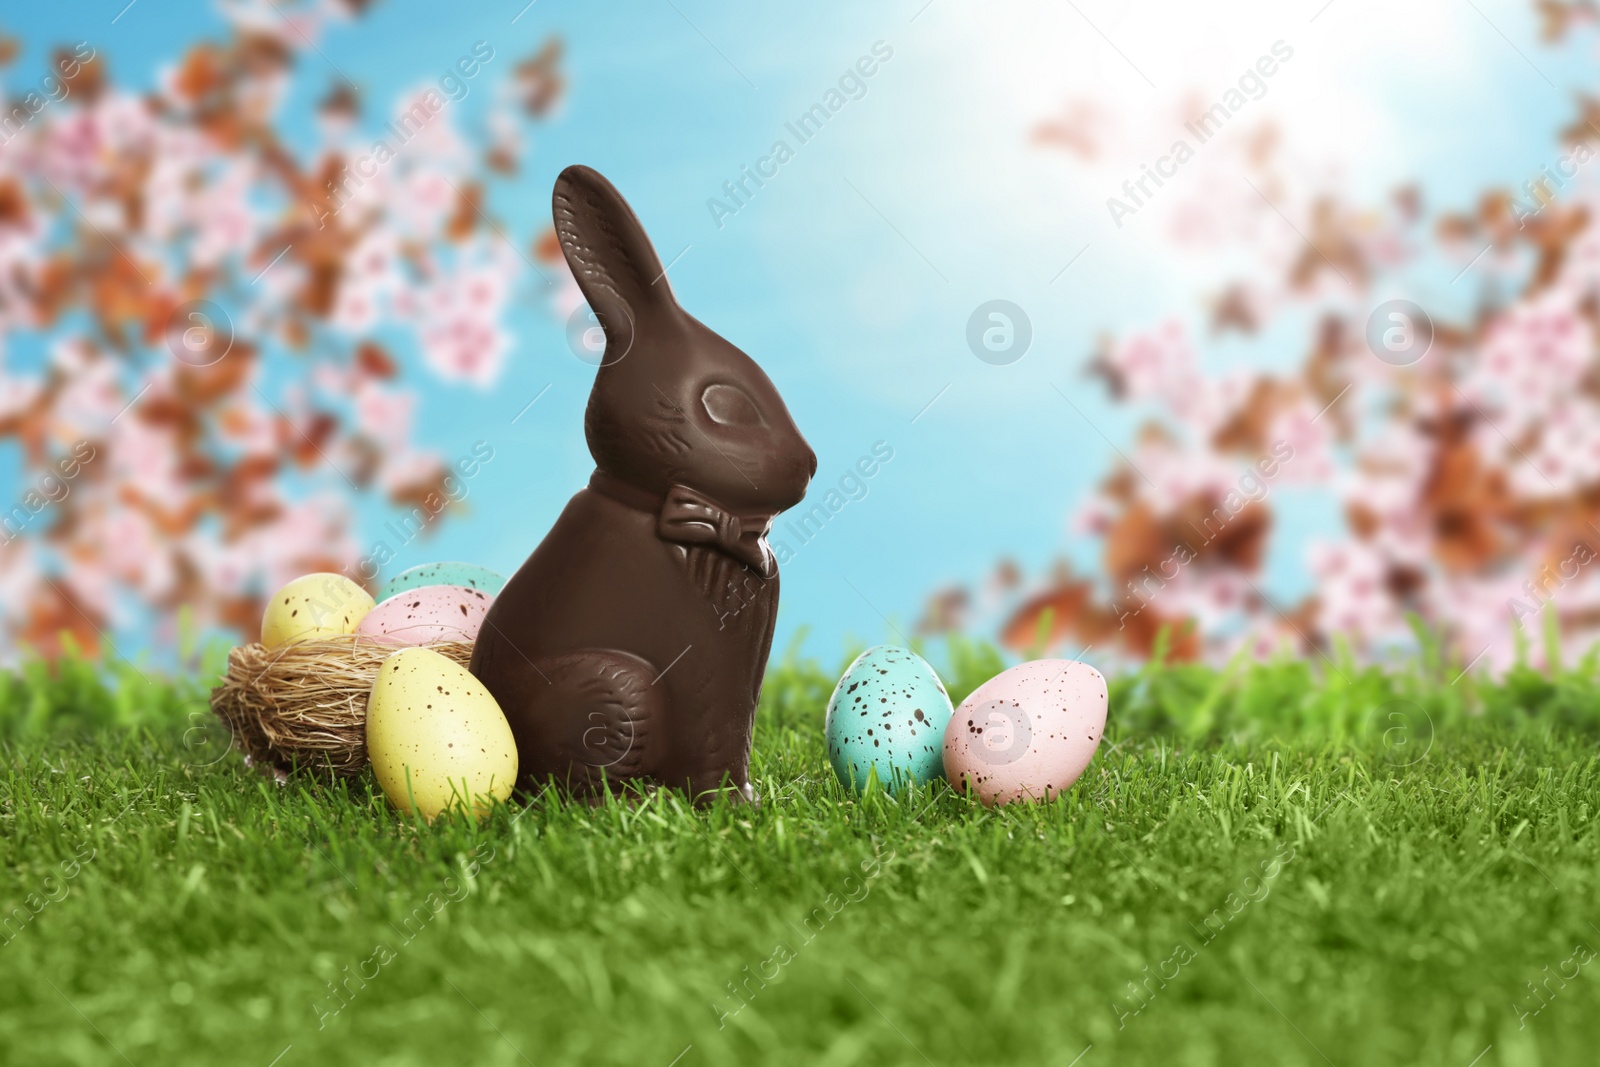 Image of Chocolate bunny and eggs on green grass outdoors. Easter celebration